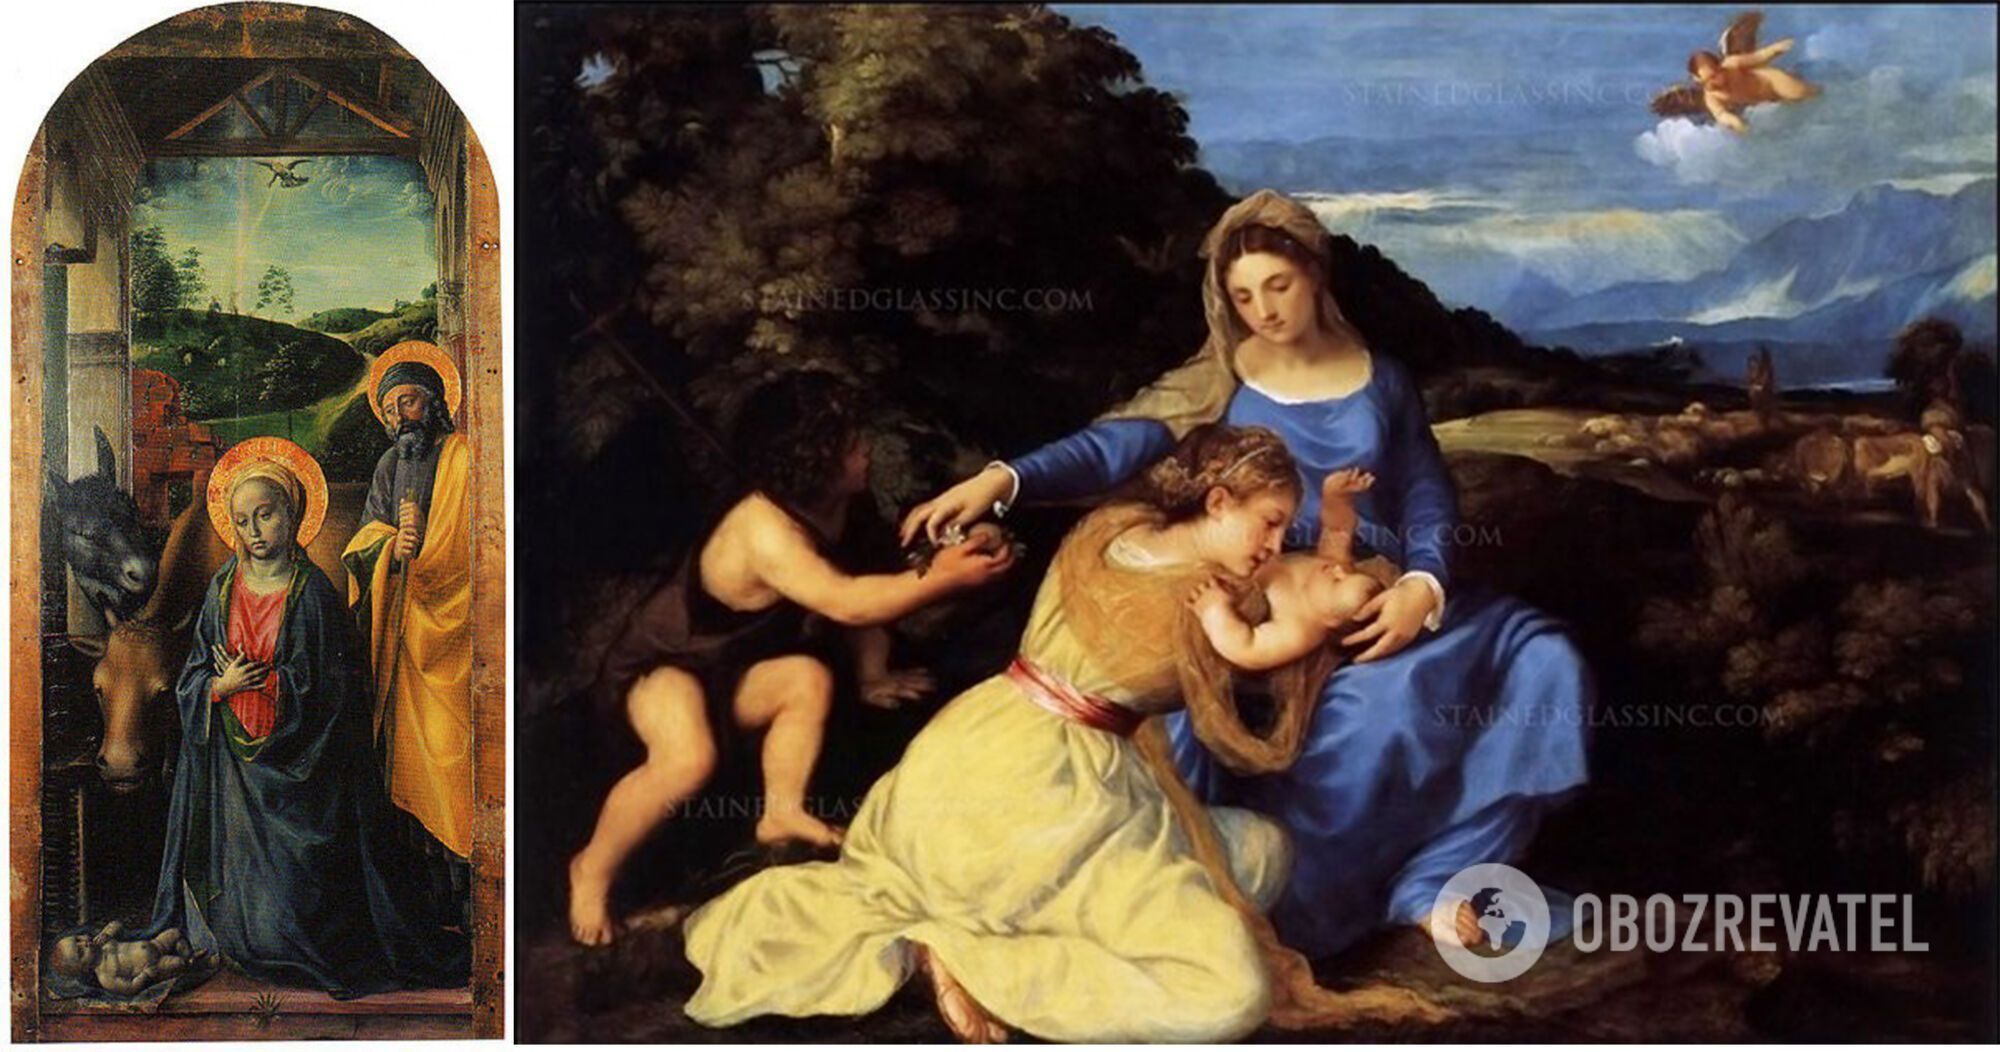 Images of angels in Florentine Renaissance paintings.